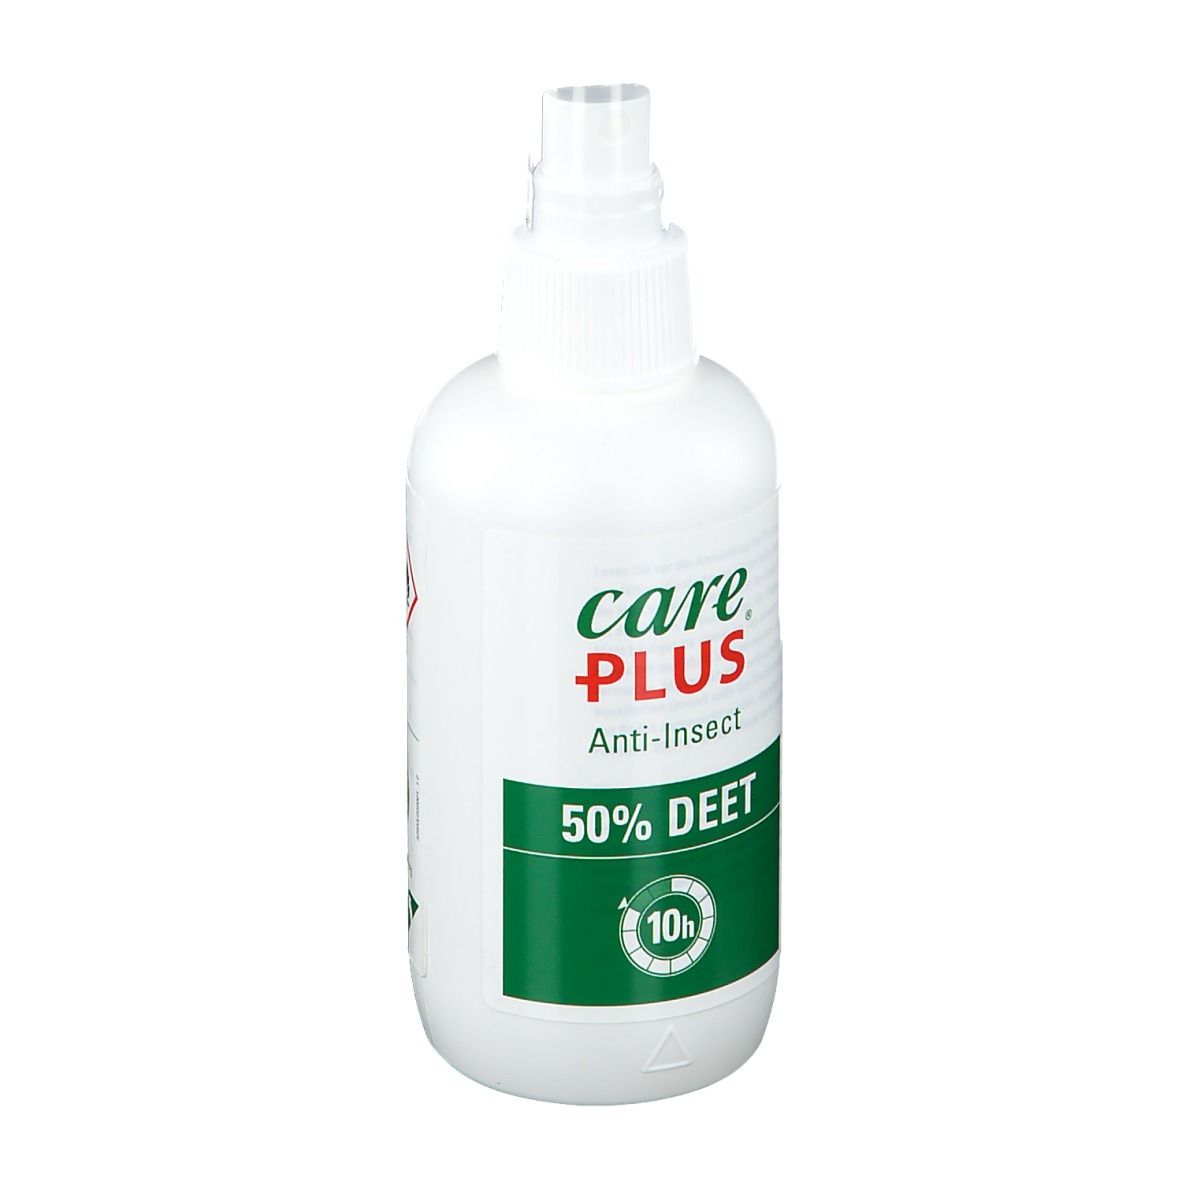 Care Plus® Anti-Insect Deet Spray 50%